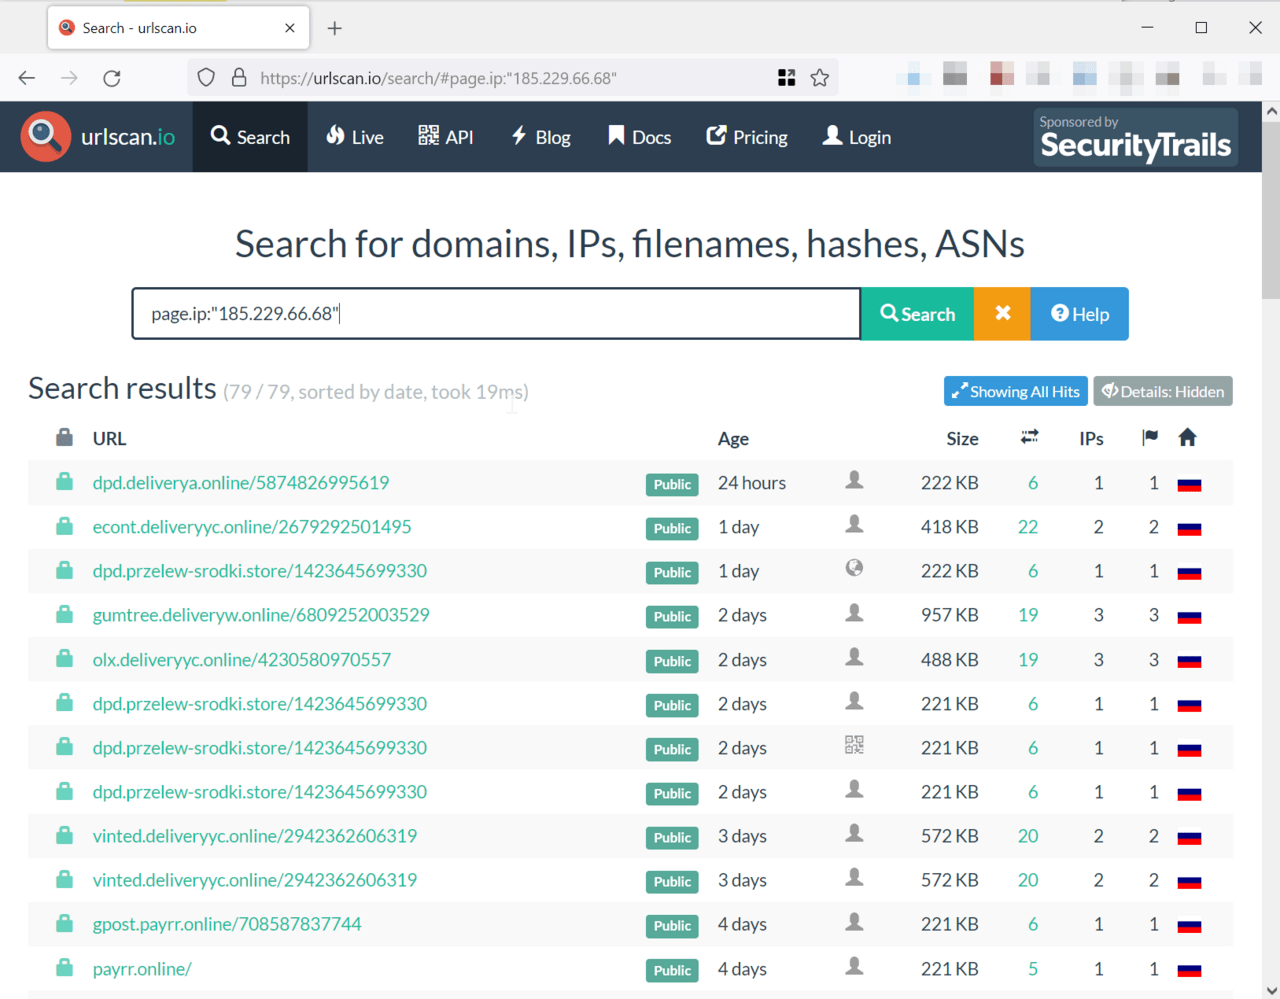 The search on urlscan.io results could reveal active scams abusing other brands.